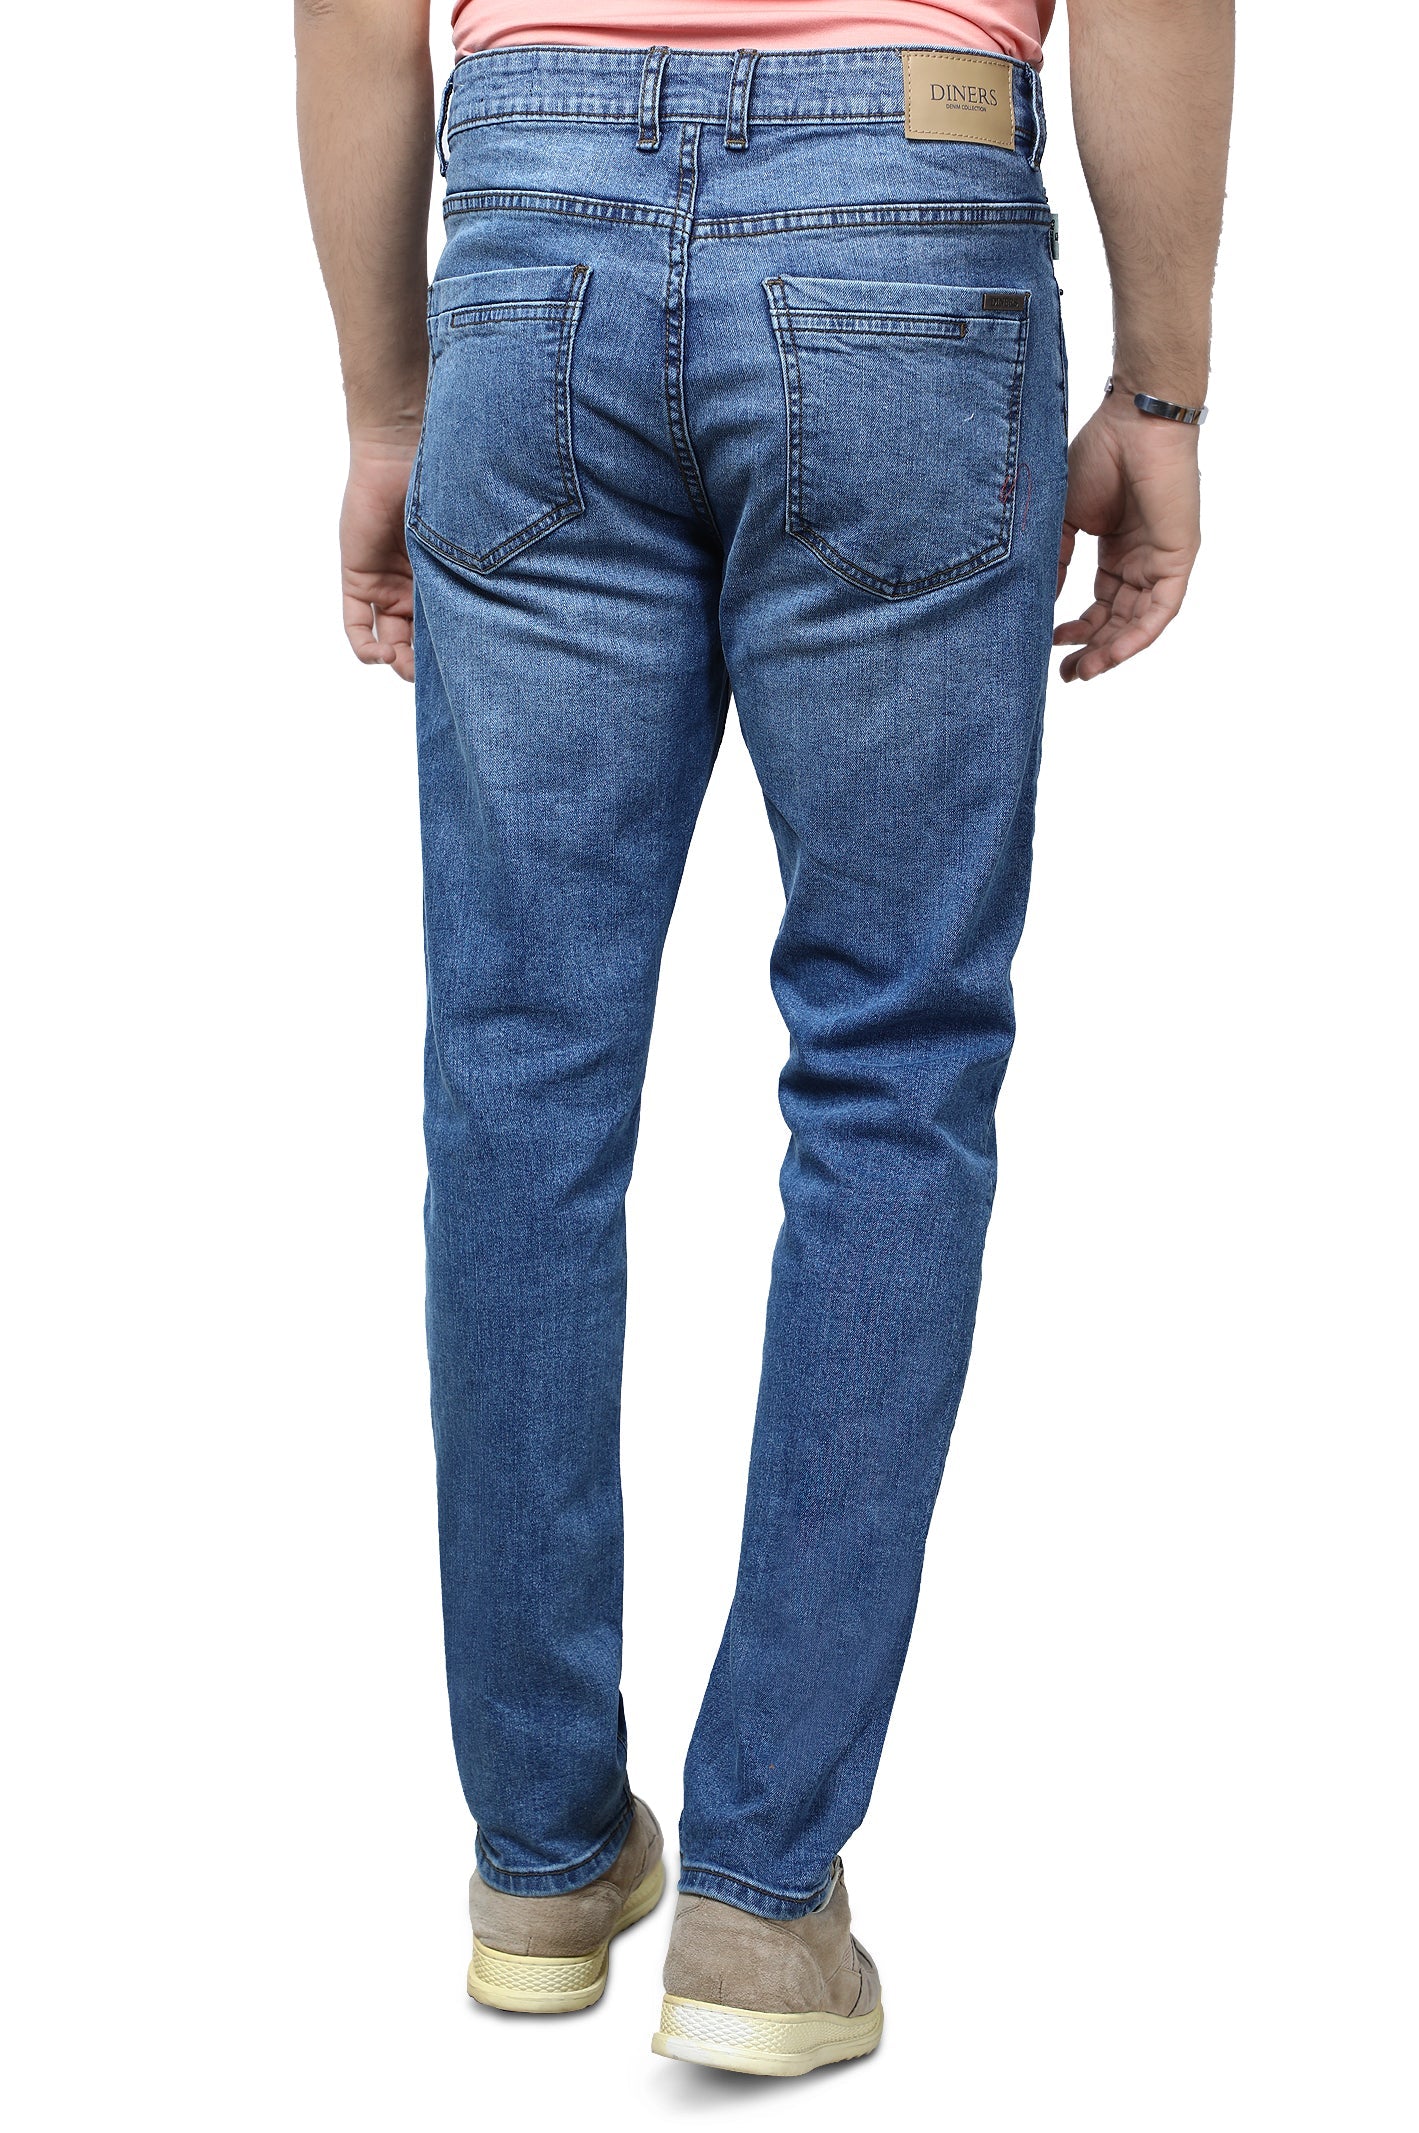 Casual Jeans SKU: BJ3123-D-BLUE - Diners